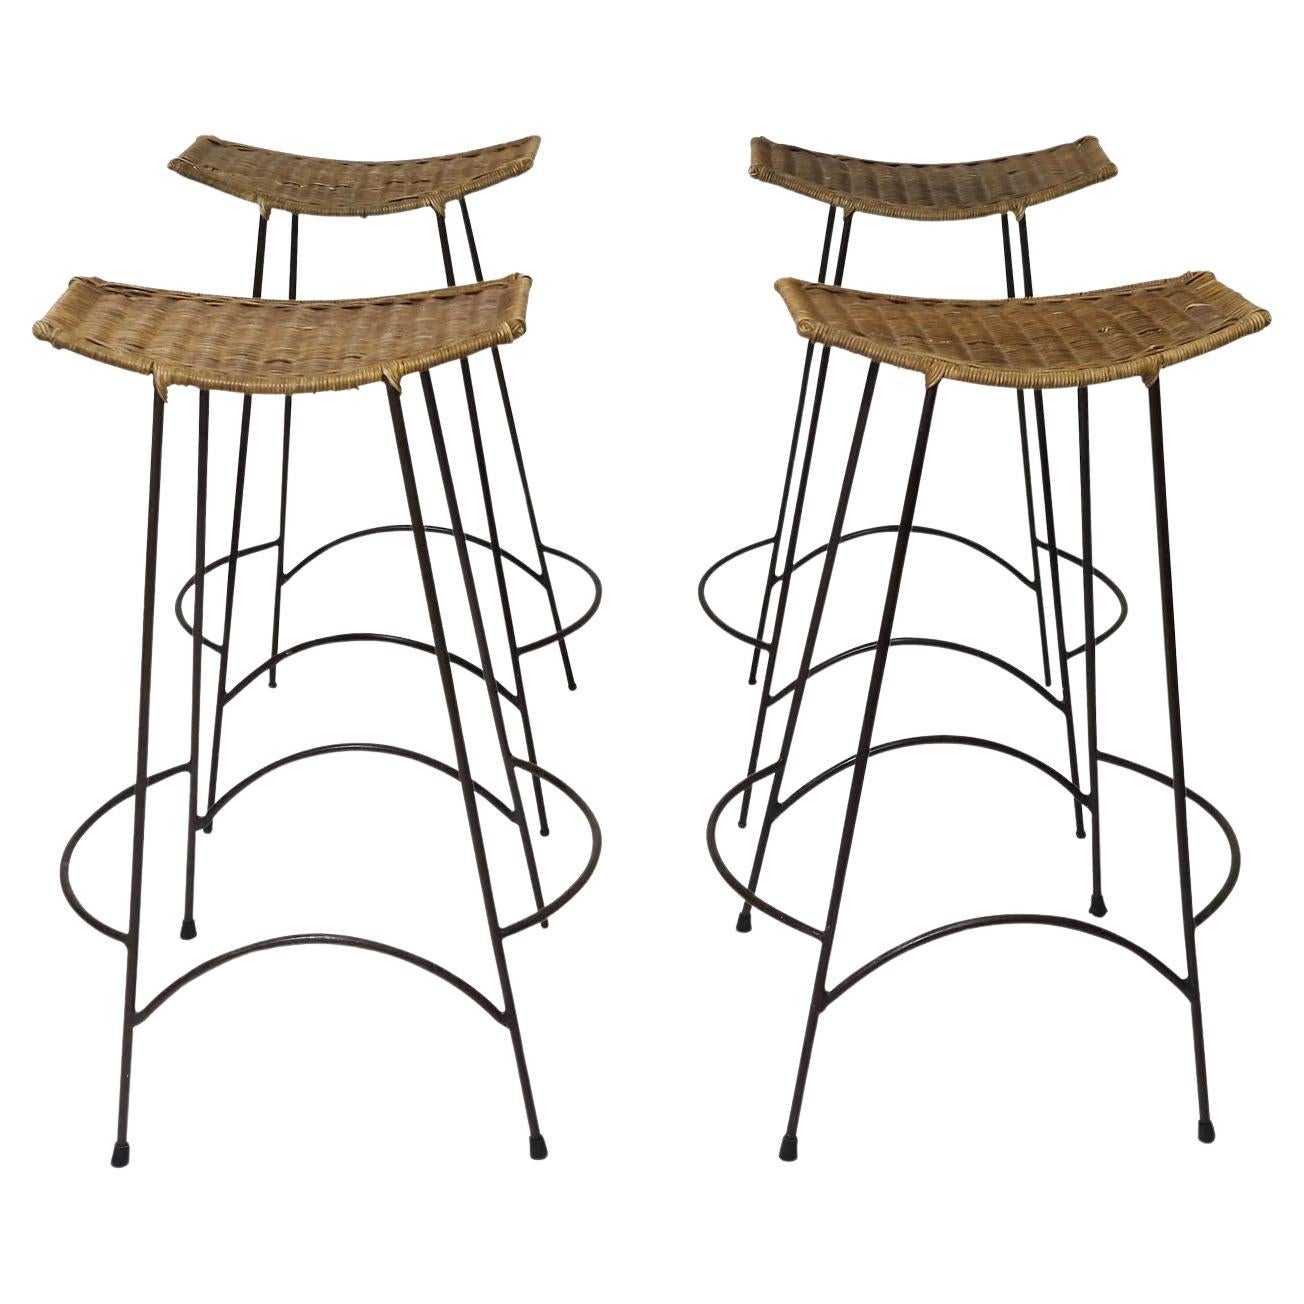 Vintage Wrought Iron and Wicker Bar Stools